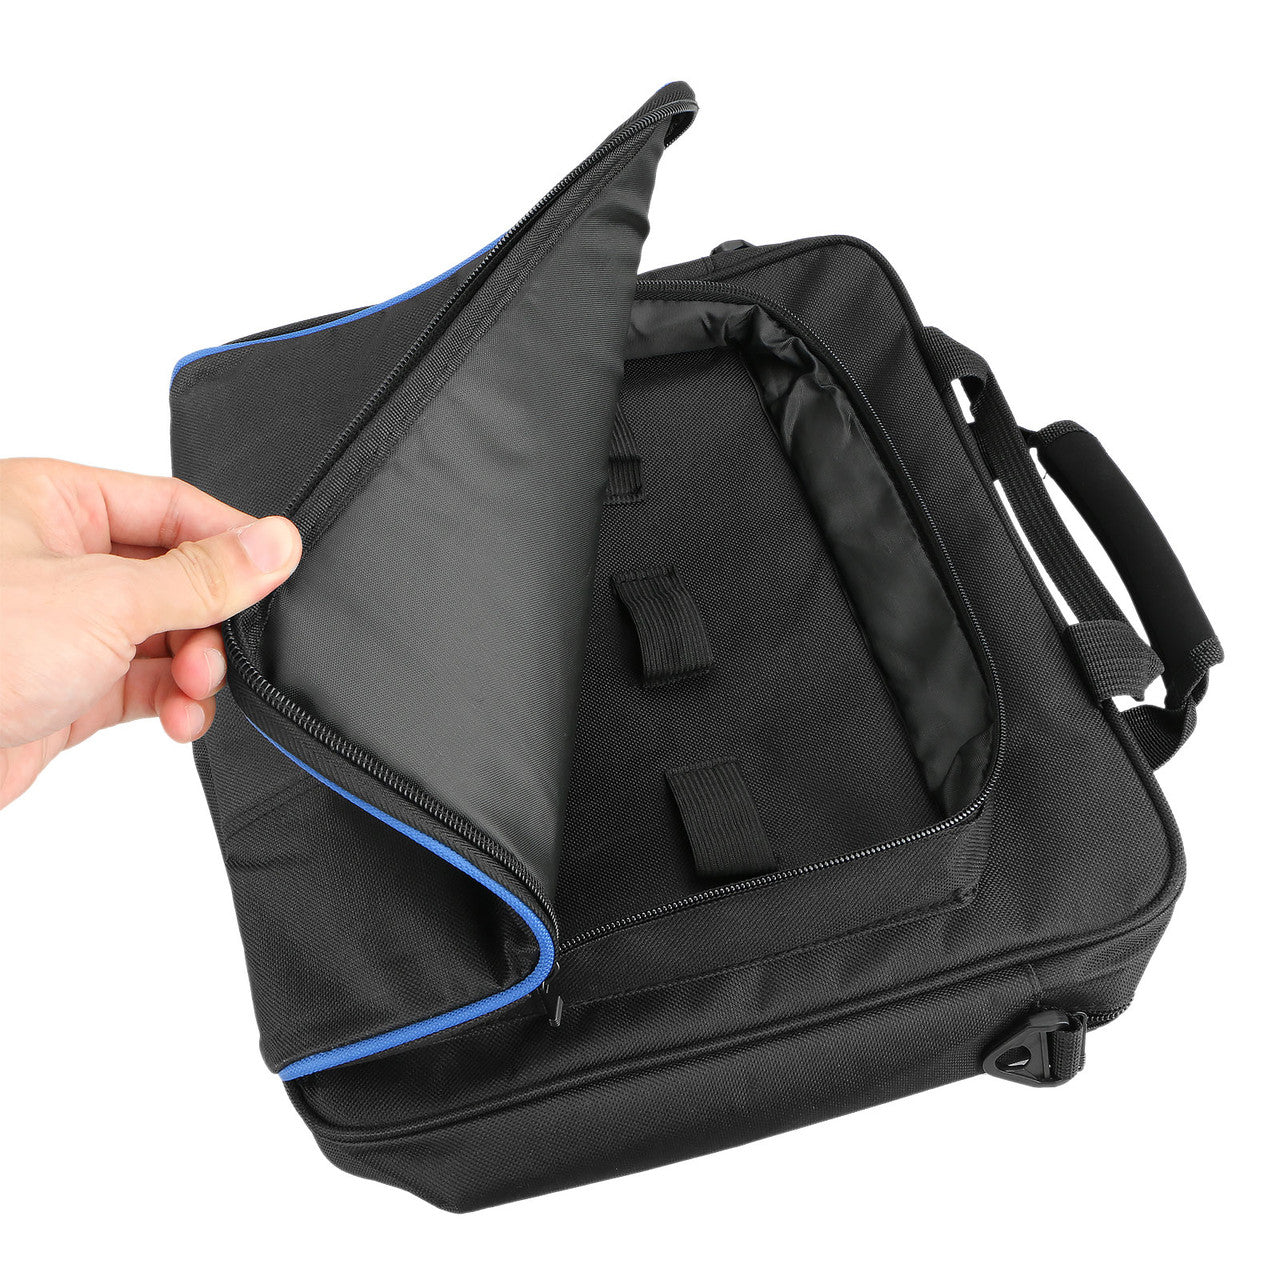 Black Multifunctional Carry Bag Travel Case Handbag For Sony PlayStation 4 PS4 Console and Accessories